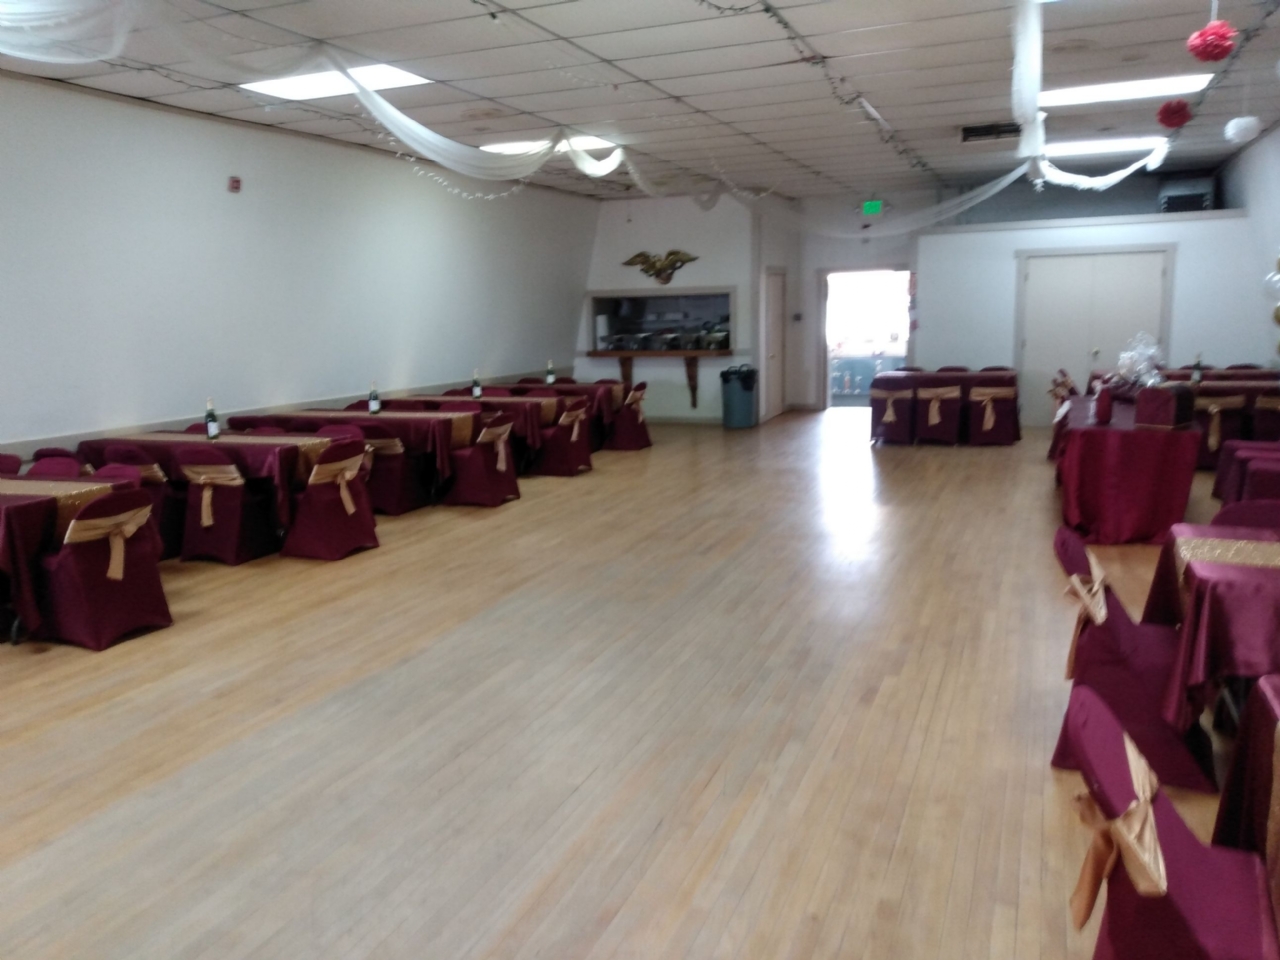 Our Event Venue is available for Daily Rentals 7 Days a week with but a few exceptions.